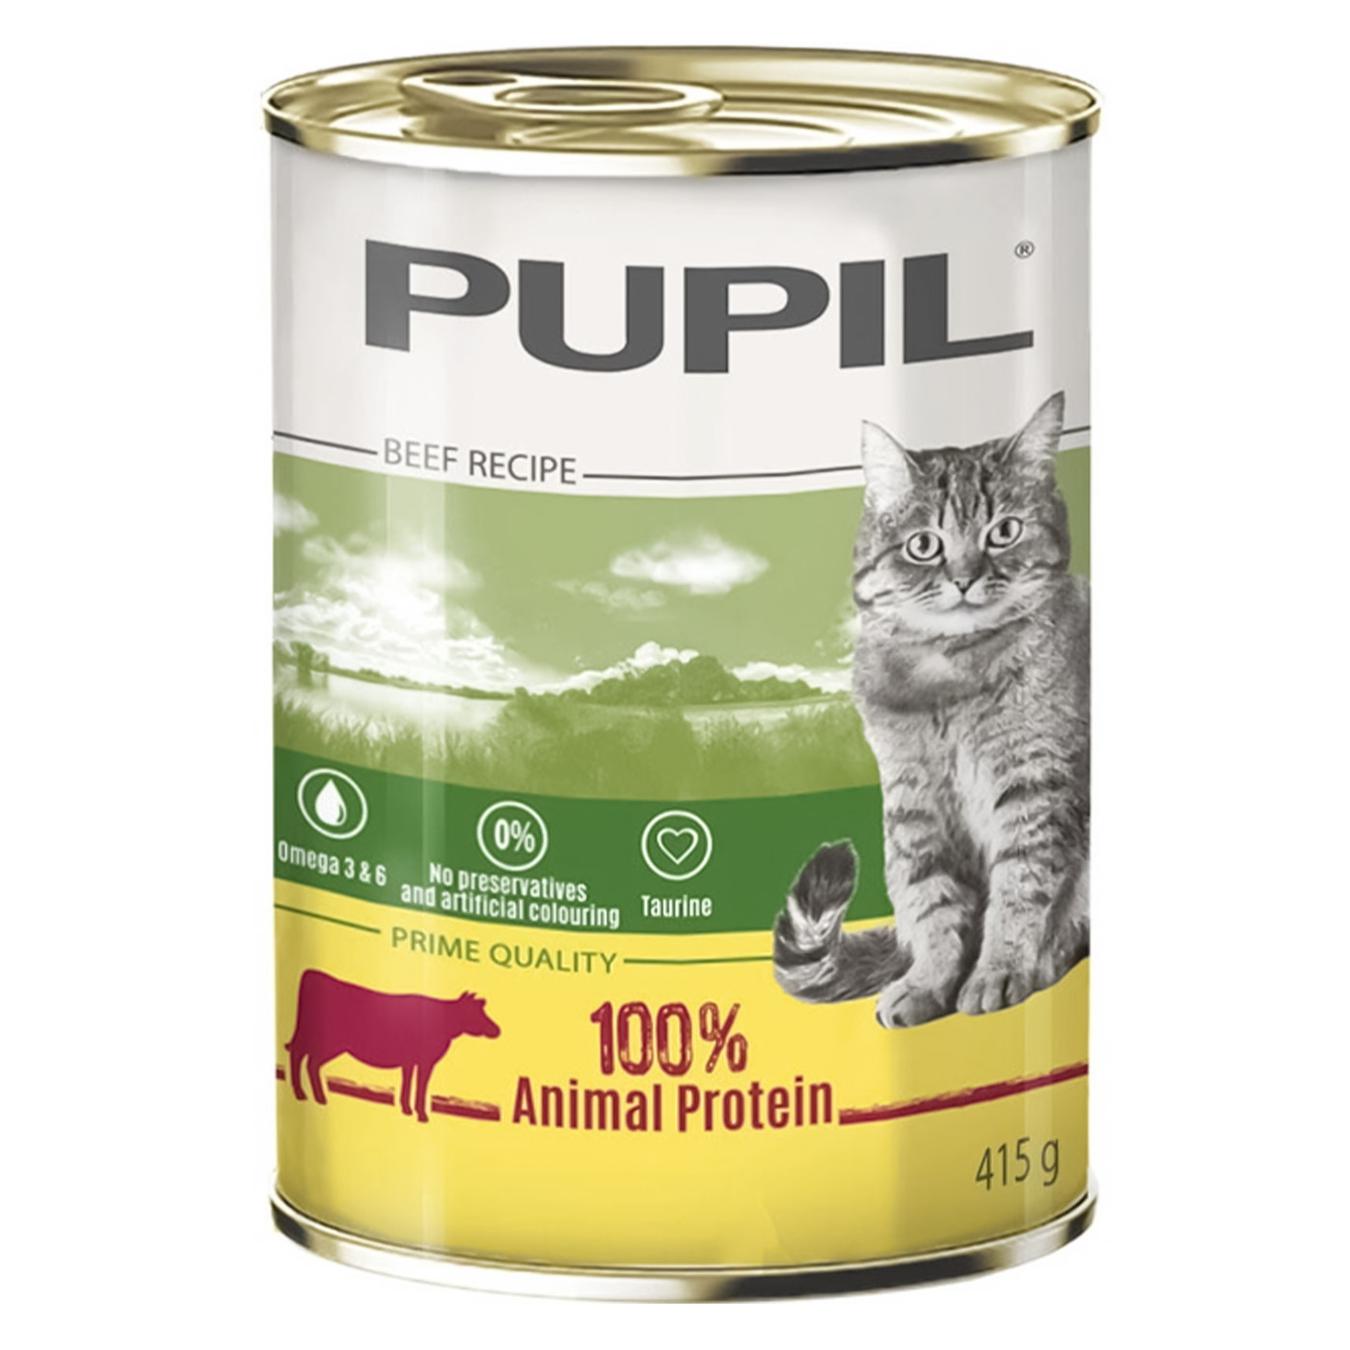 Pupil food for cats canned sauce with beef and liver 415g